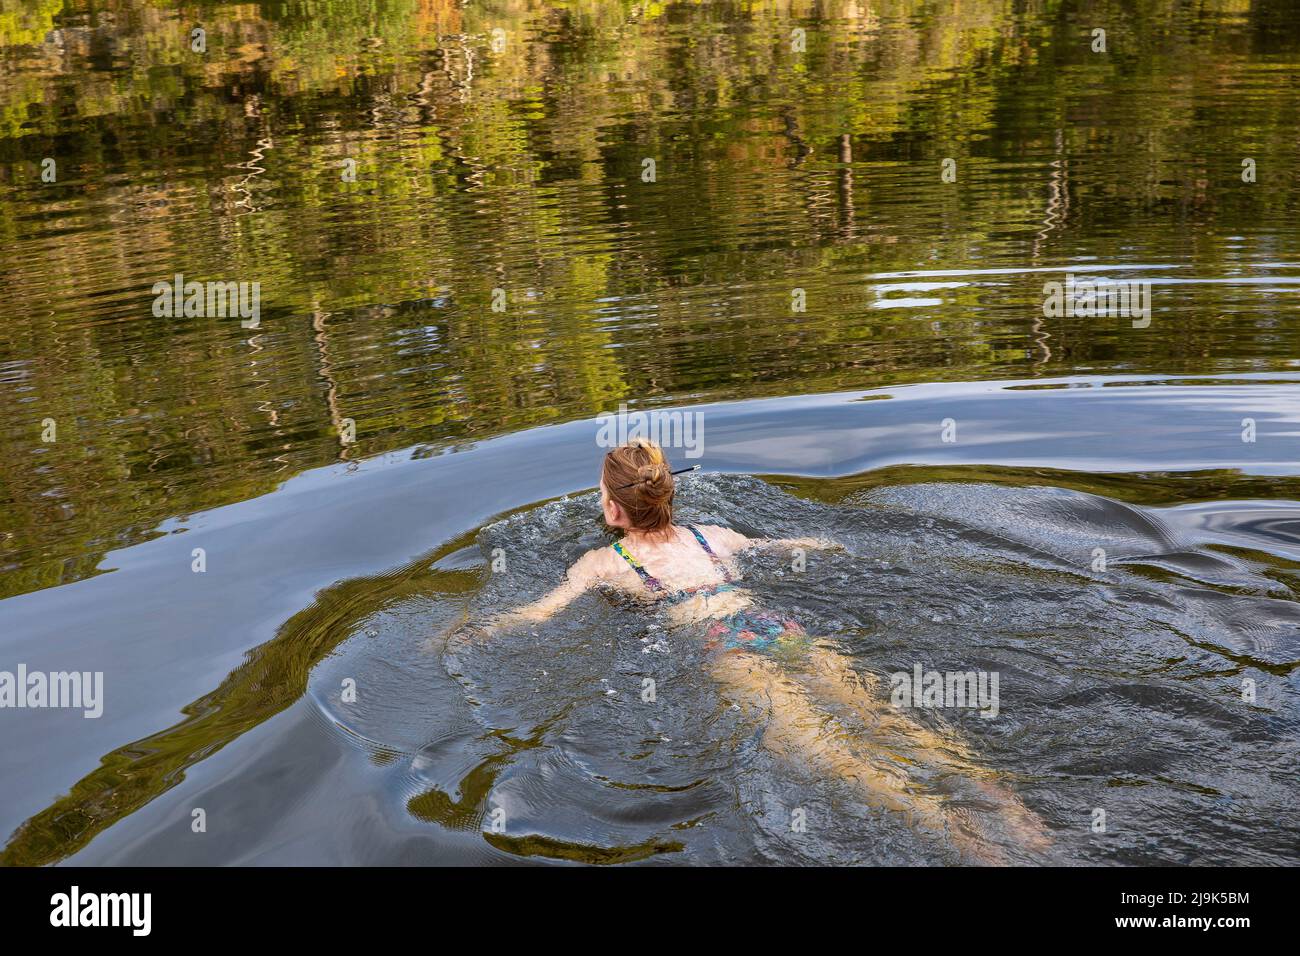 Carefree woman swimming in tranquil summer river Stock Photo